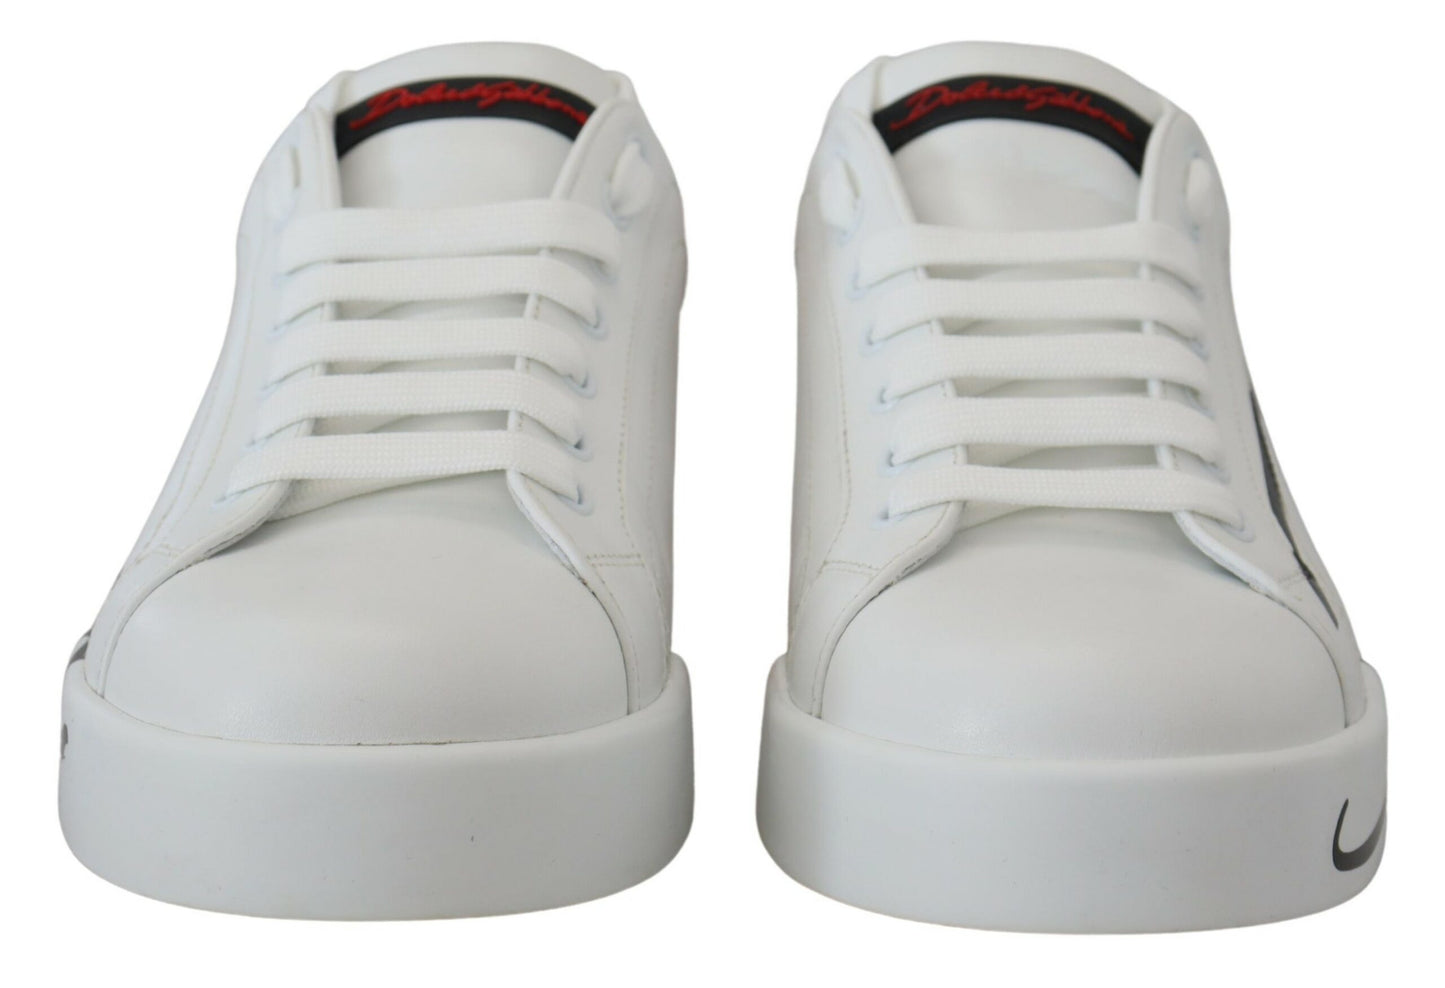 Elegant White & Red Leather Sneakers